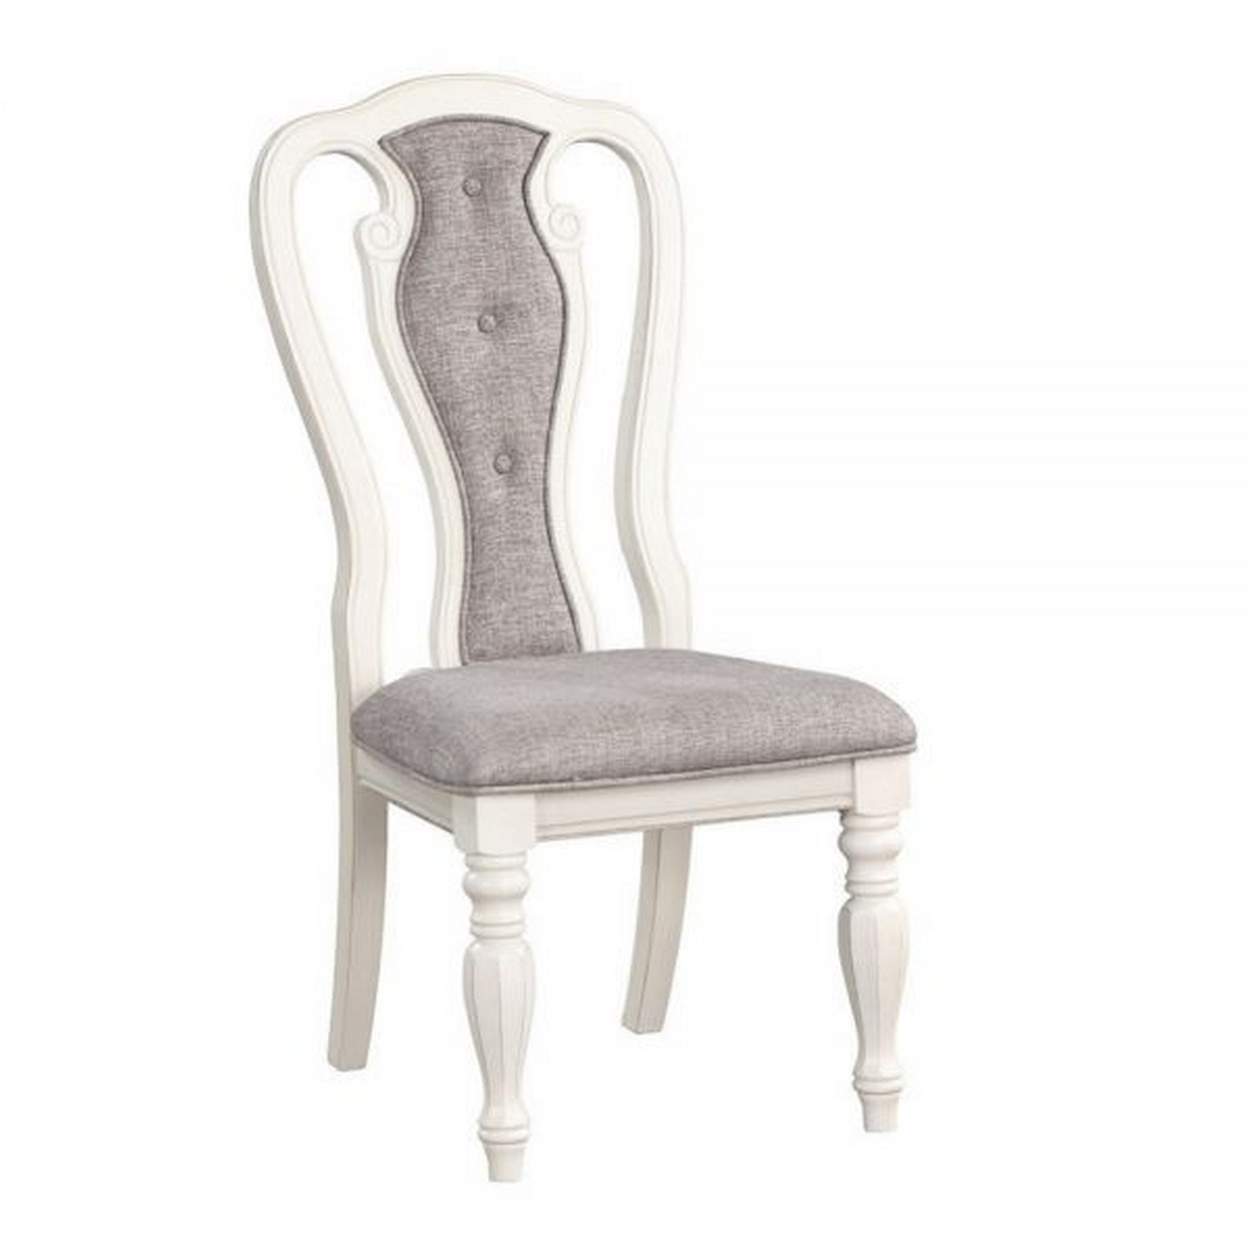 Fil 23 Inch Dining Side Chair Set Of 2, Tufted Gray Fabric, Queen Anne - Saltoro Sherpi